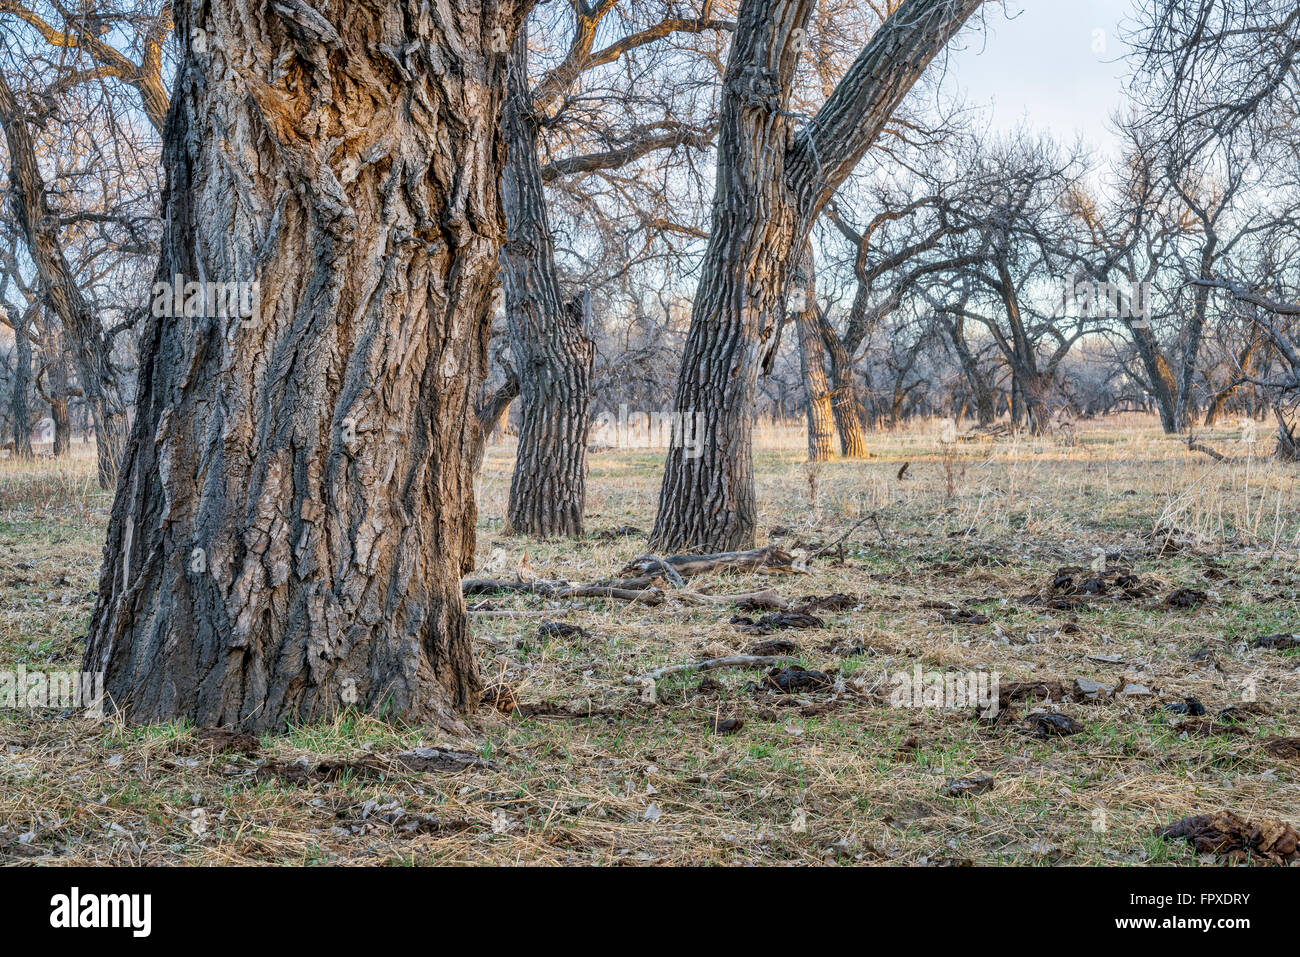 riparian forest along South Platte River in eastern Colorado, early spring scenery in sunset light Stock Photo